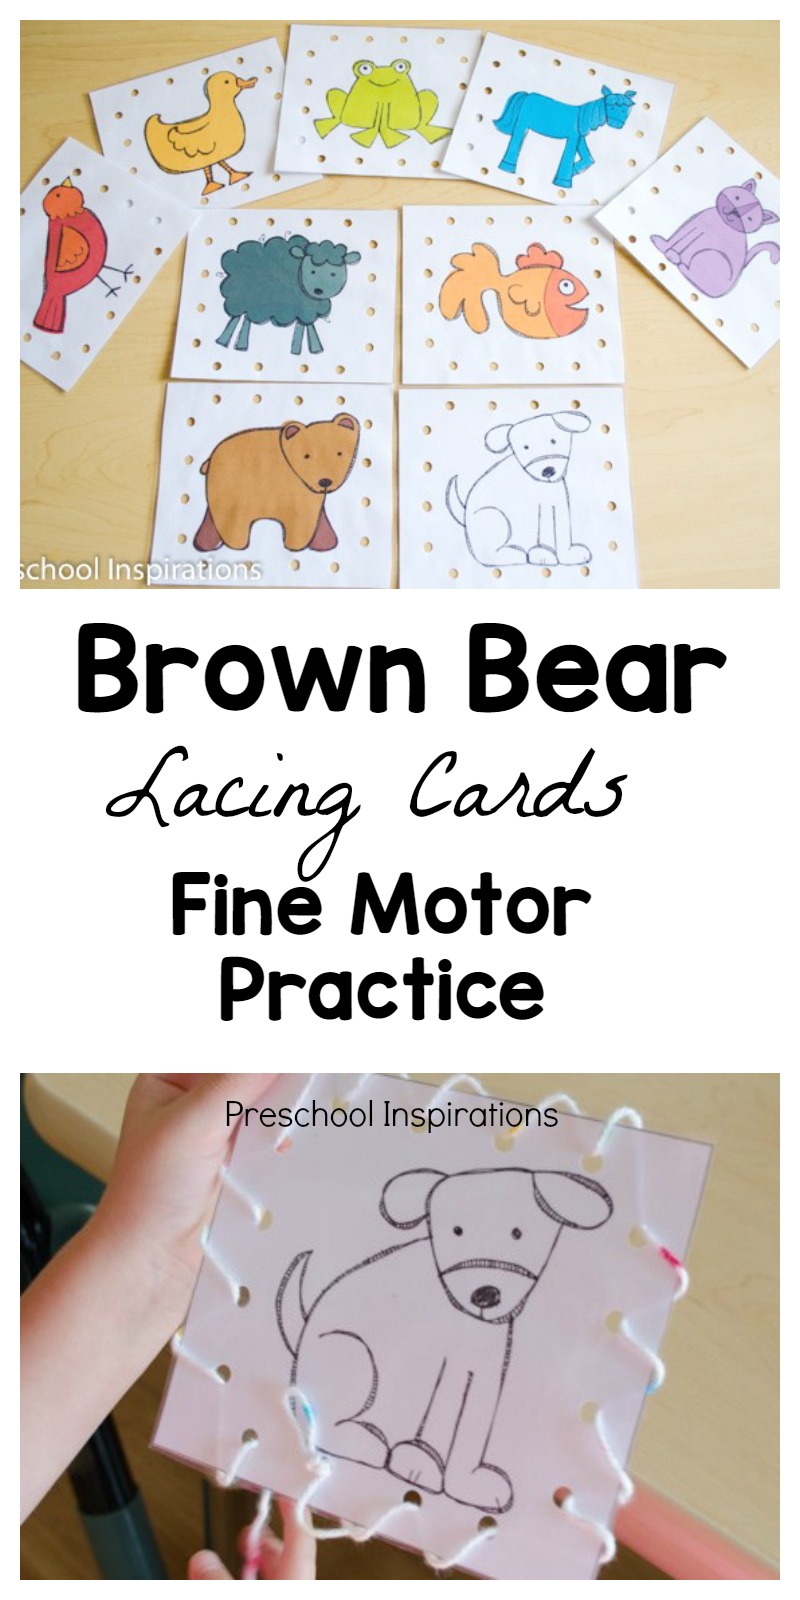 Practice important fine motor skills with these Brown Bear lacing cards. #preschool #prek #finemotor #storyunits #busybags 